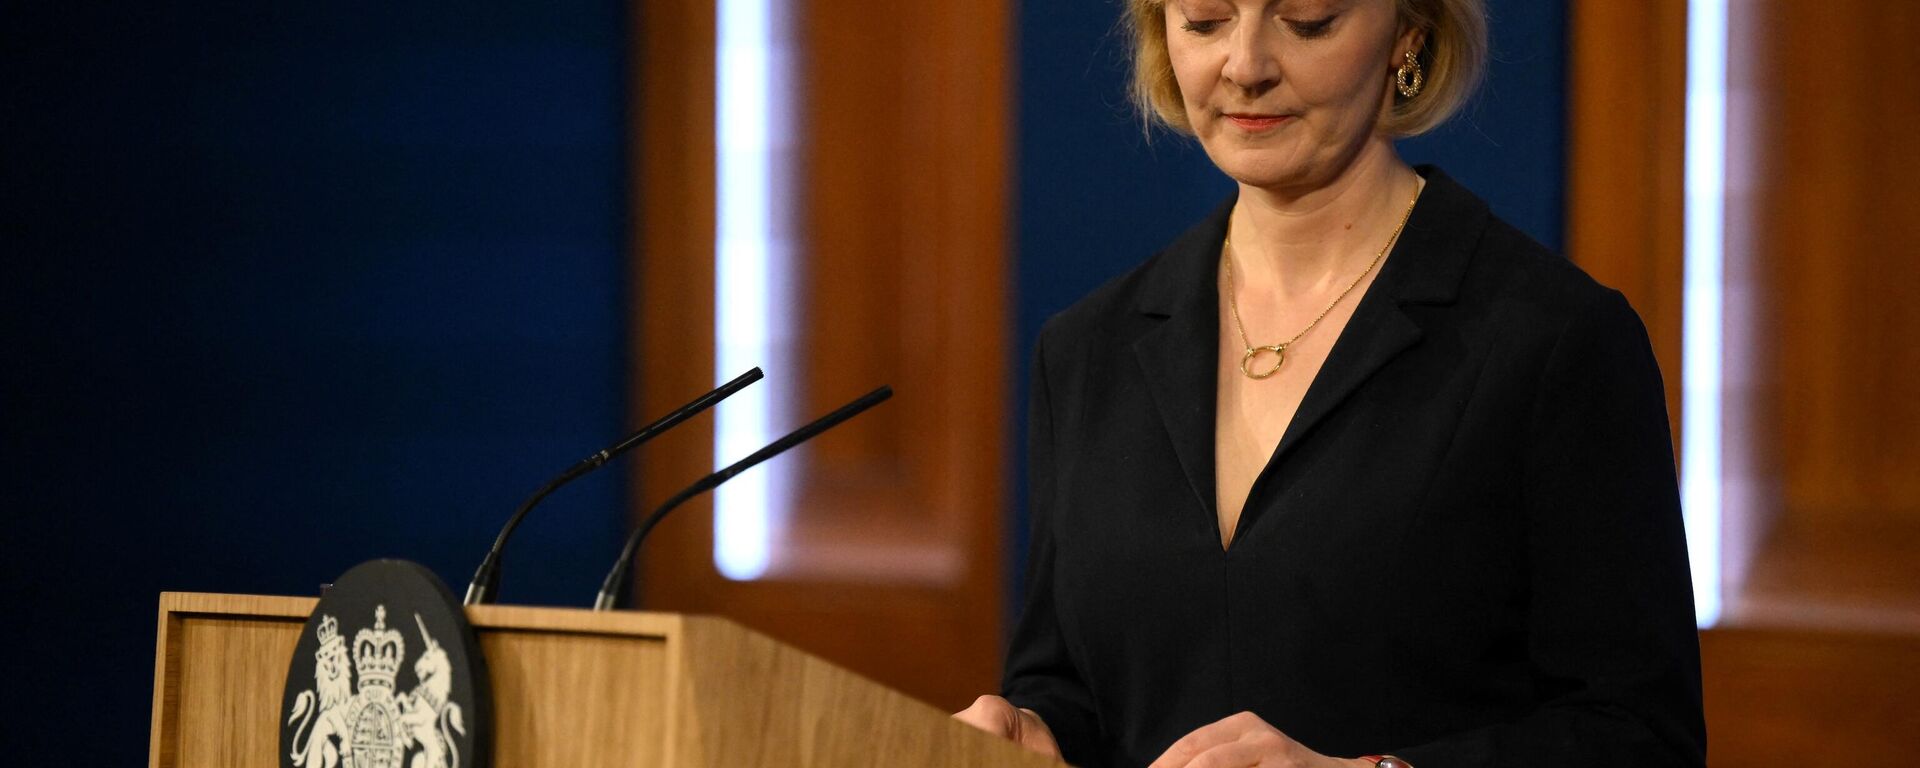 Britain's Prime Minister Liz Truss looks down during a press conference in the Downing Street Briefing Room in central London on October 14, 2022 - Sputnik Србија, 1920, 01.11.2022